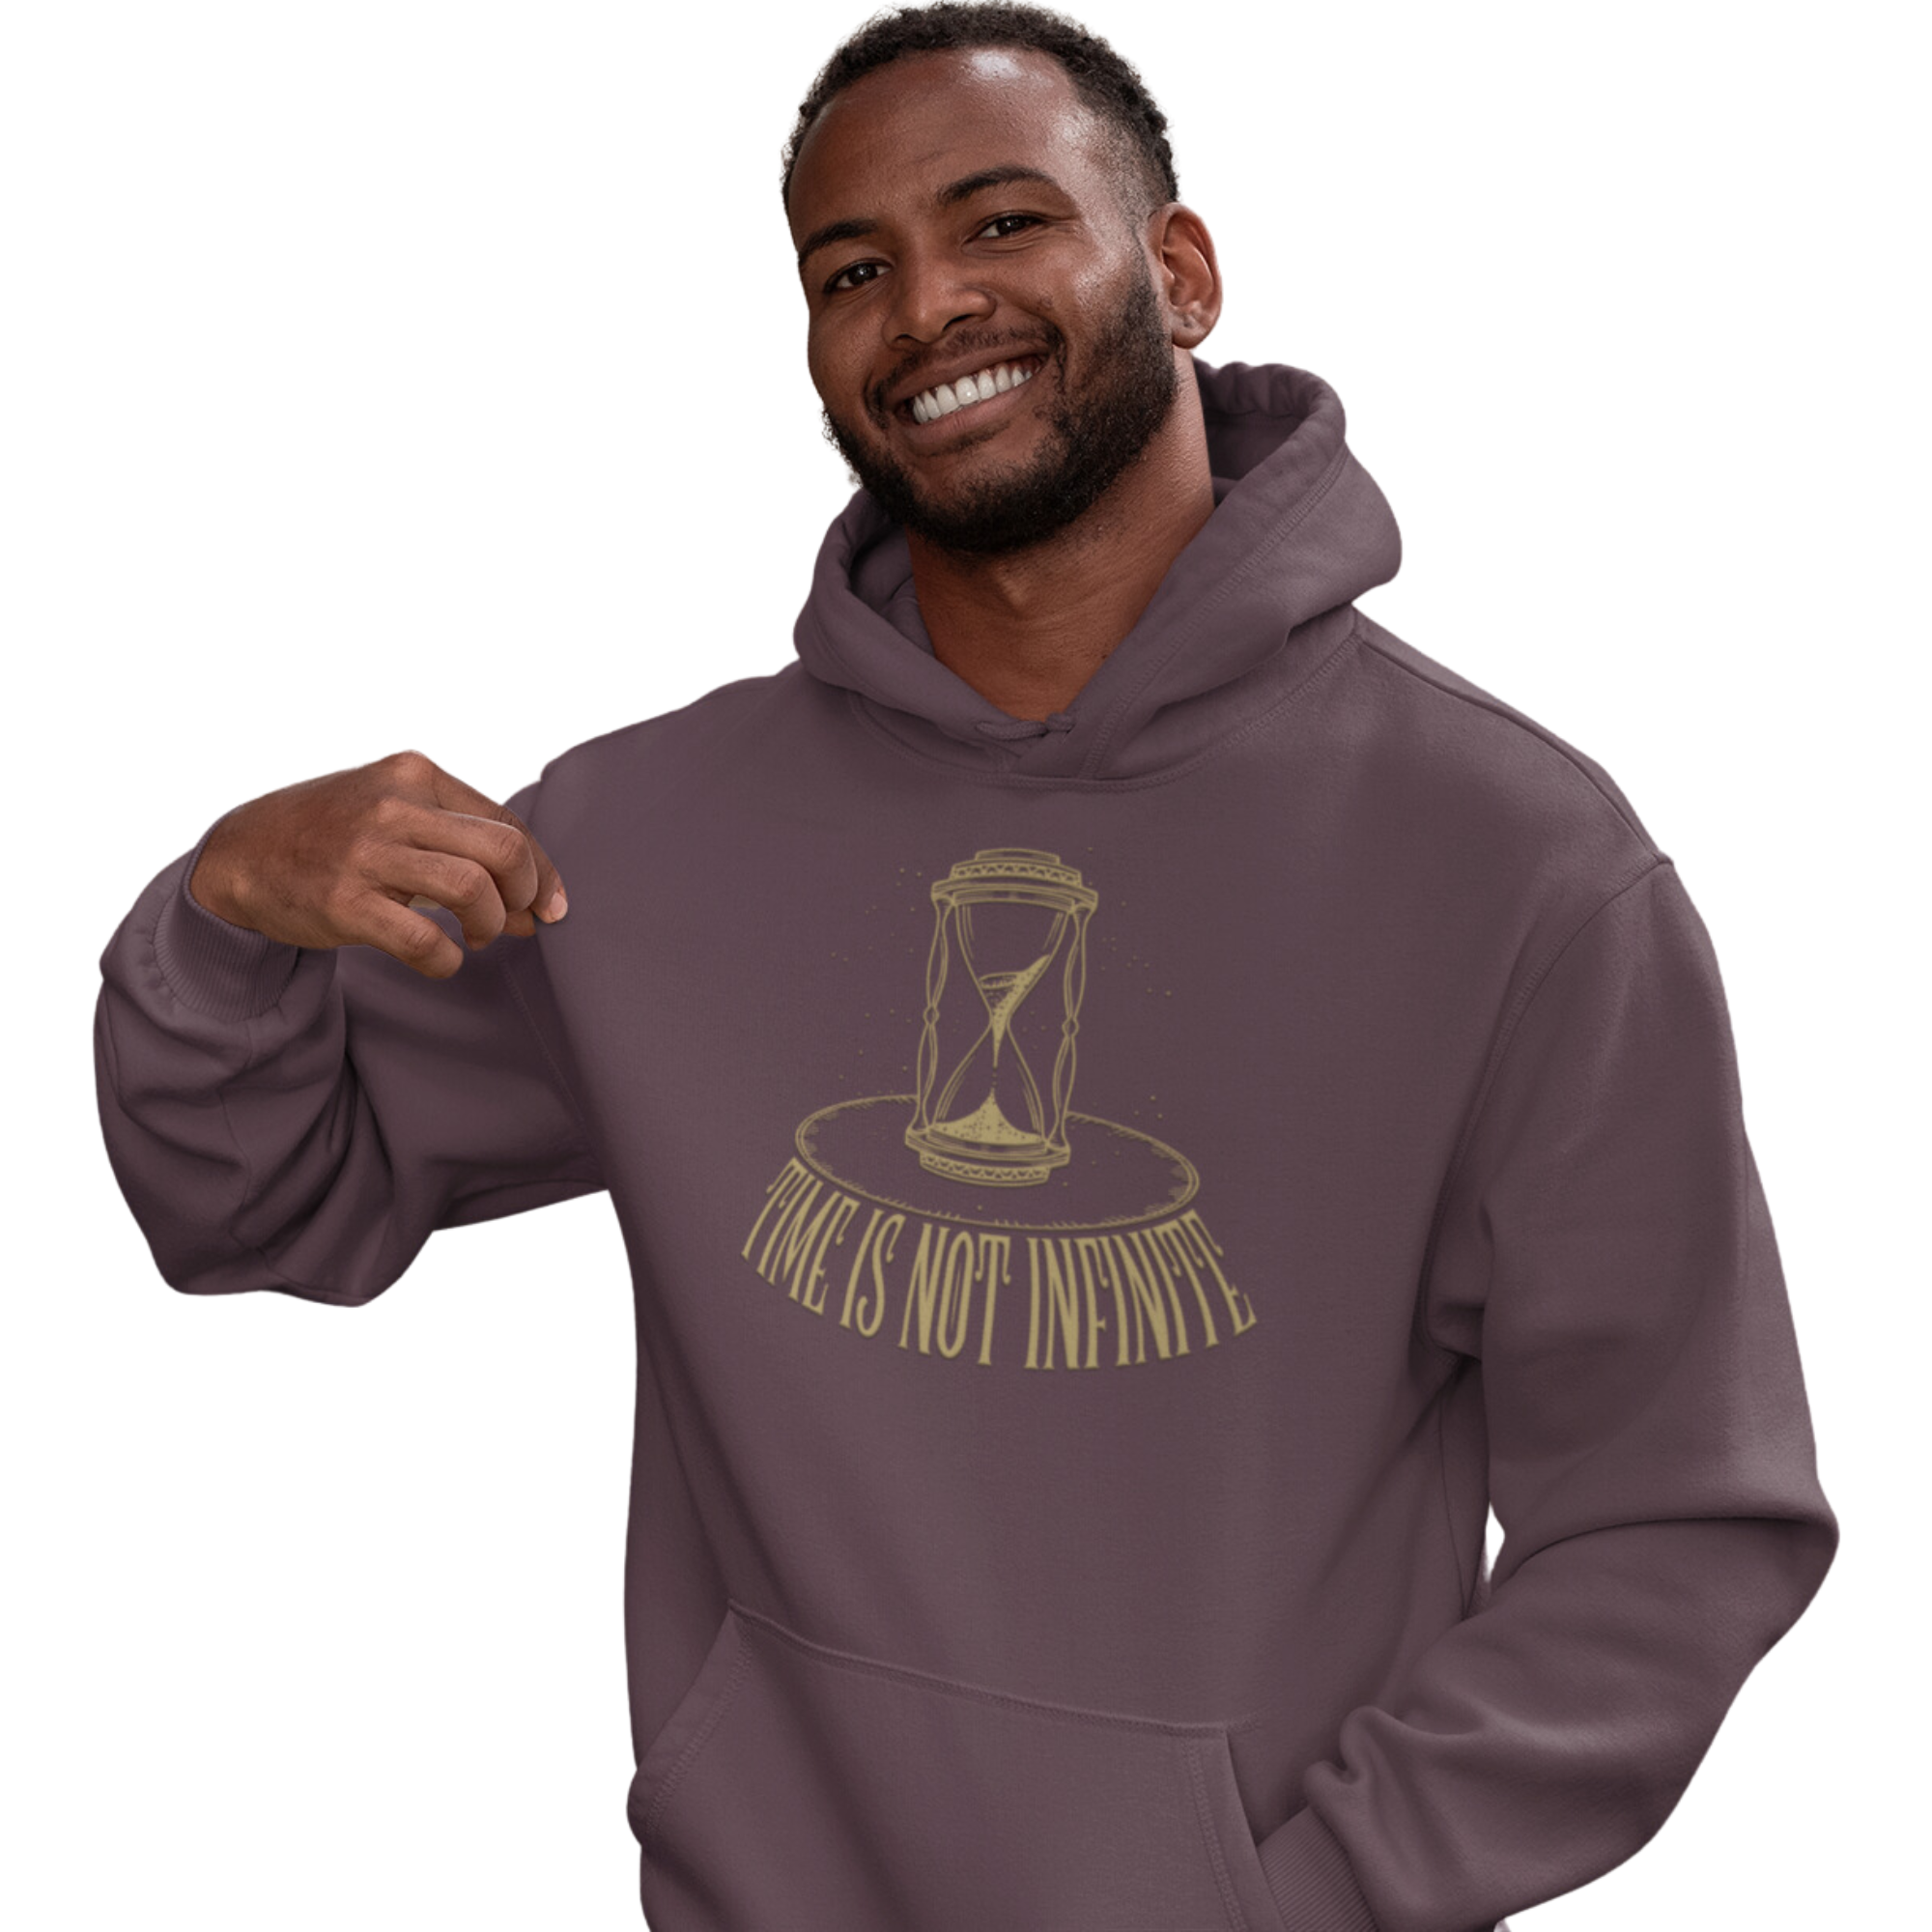 the time is not infinite hoodie. the color is brown with an hourglass signifying the loss of time in lif